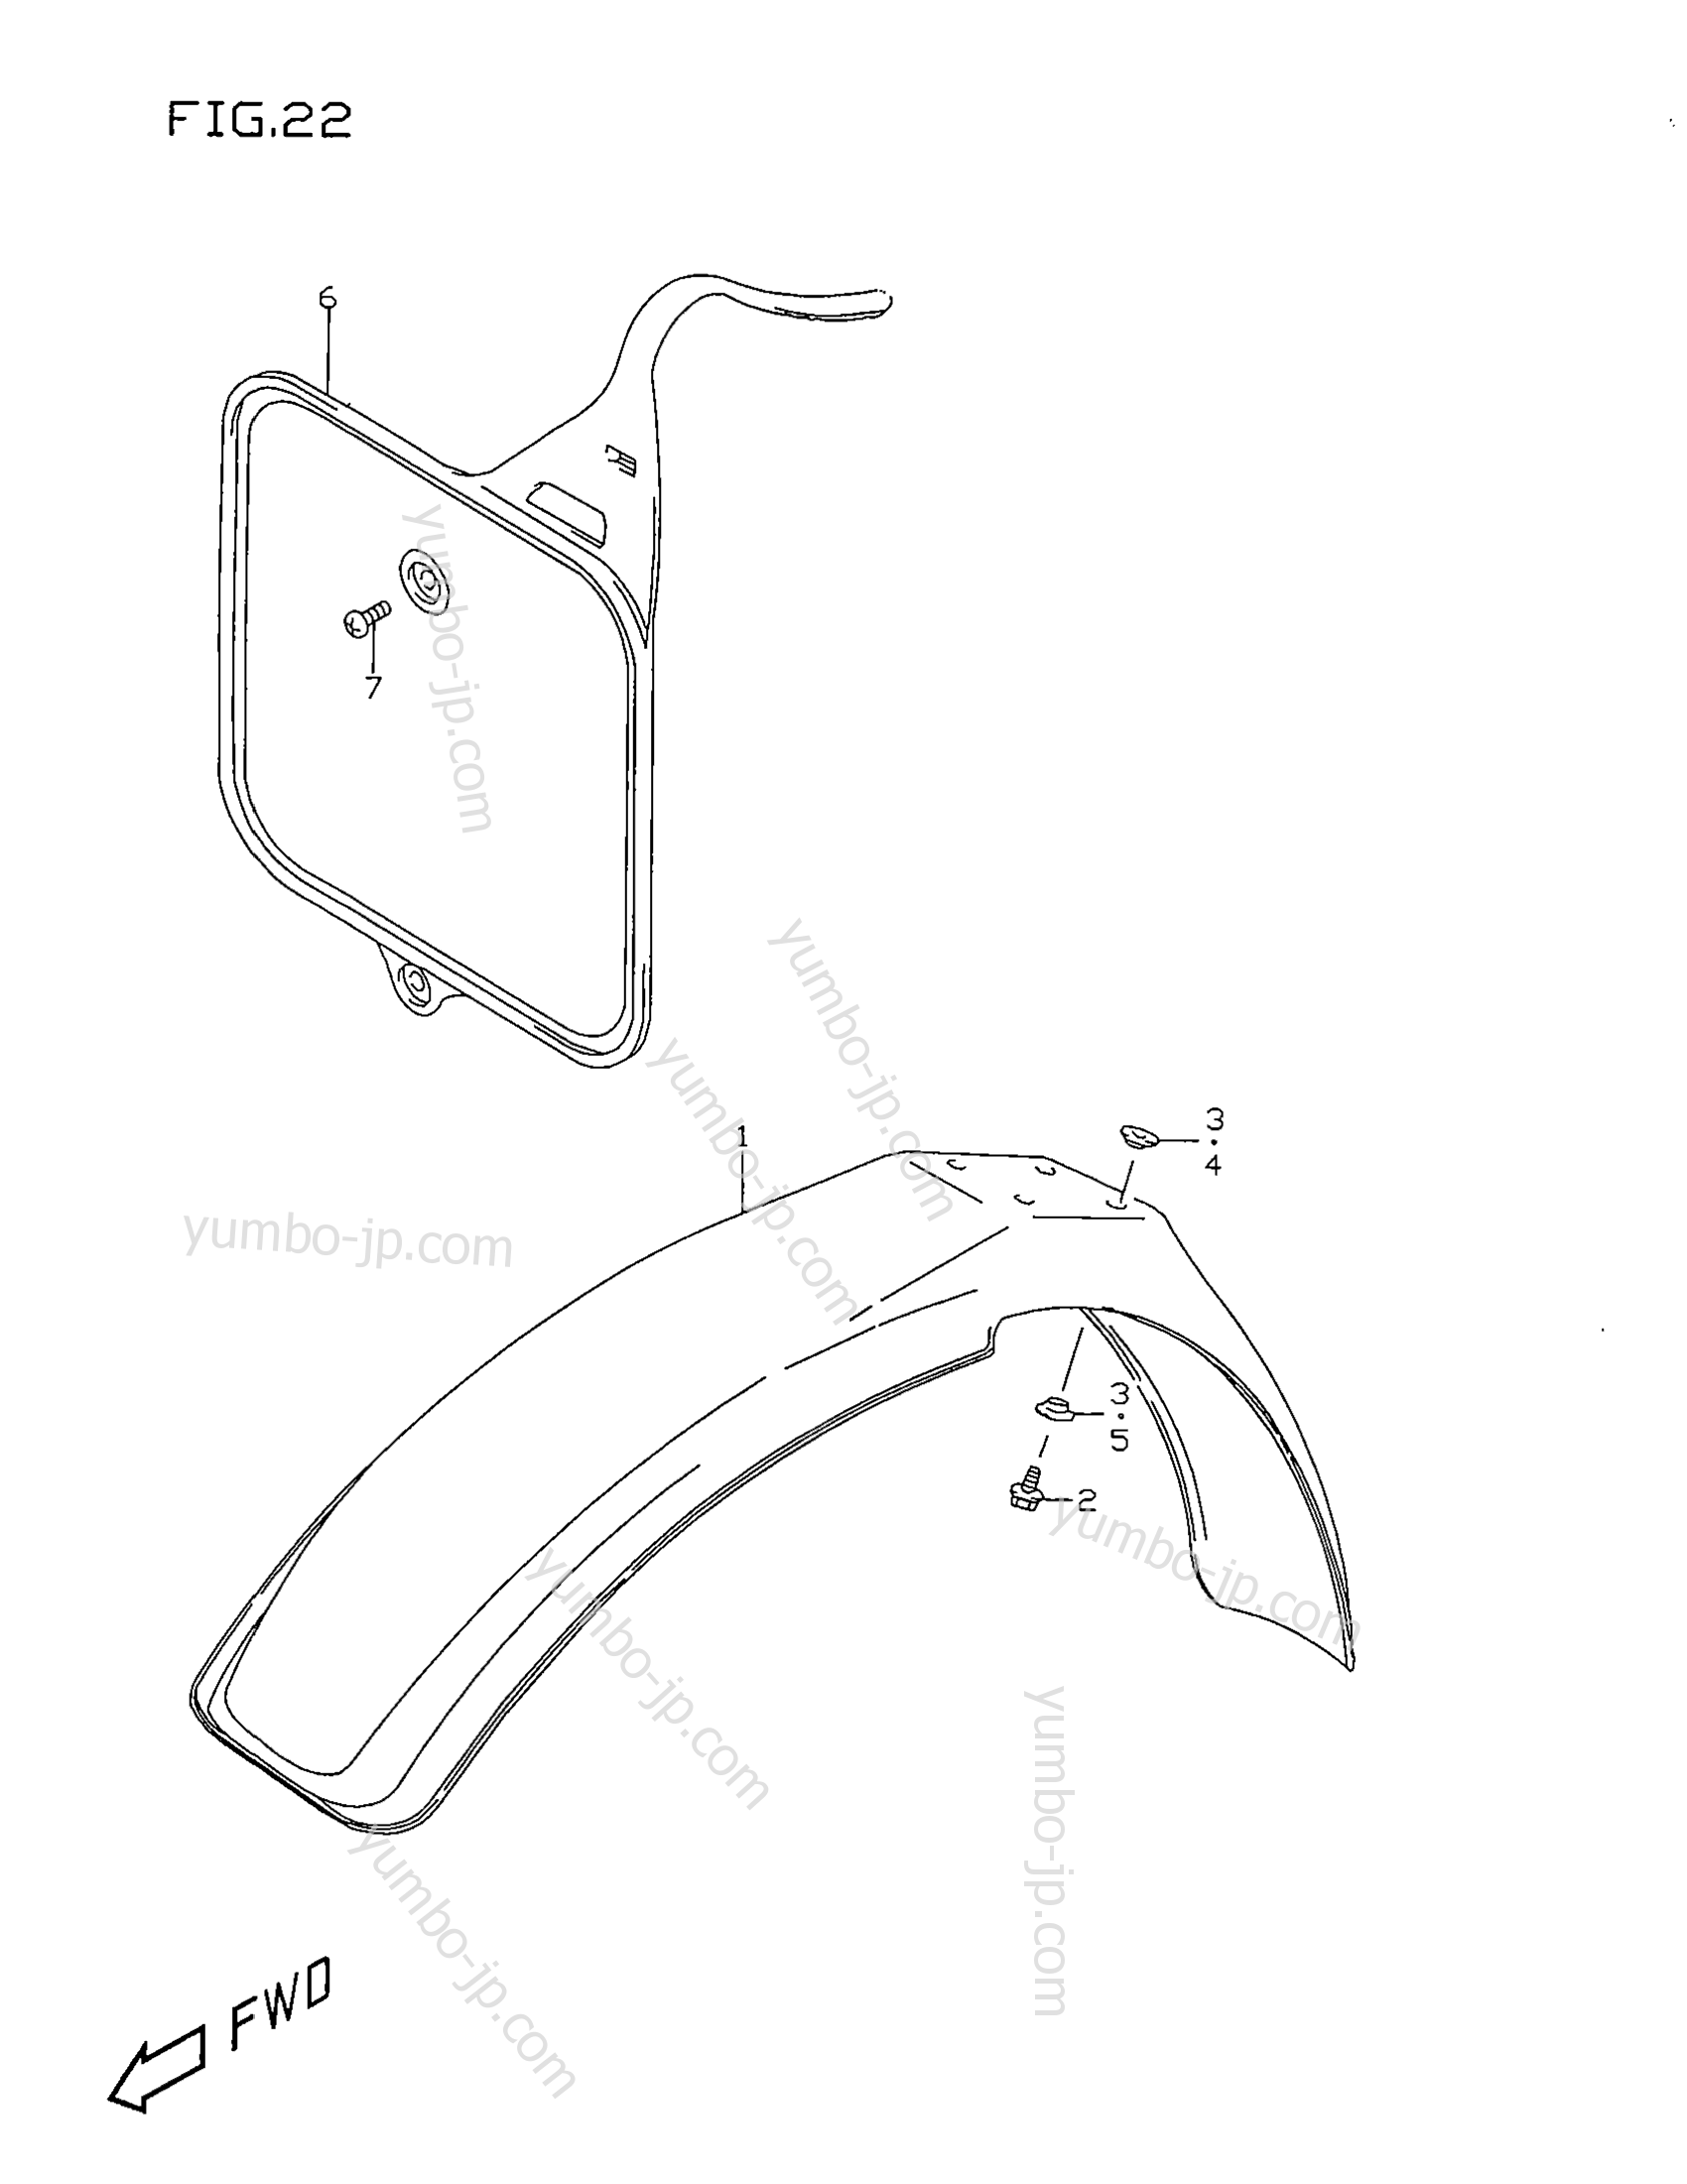 FRONT FENDER for motorcycles SUZUKI RM80 1997 year